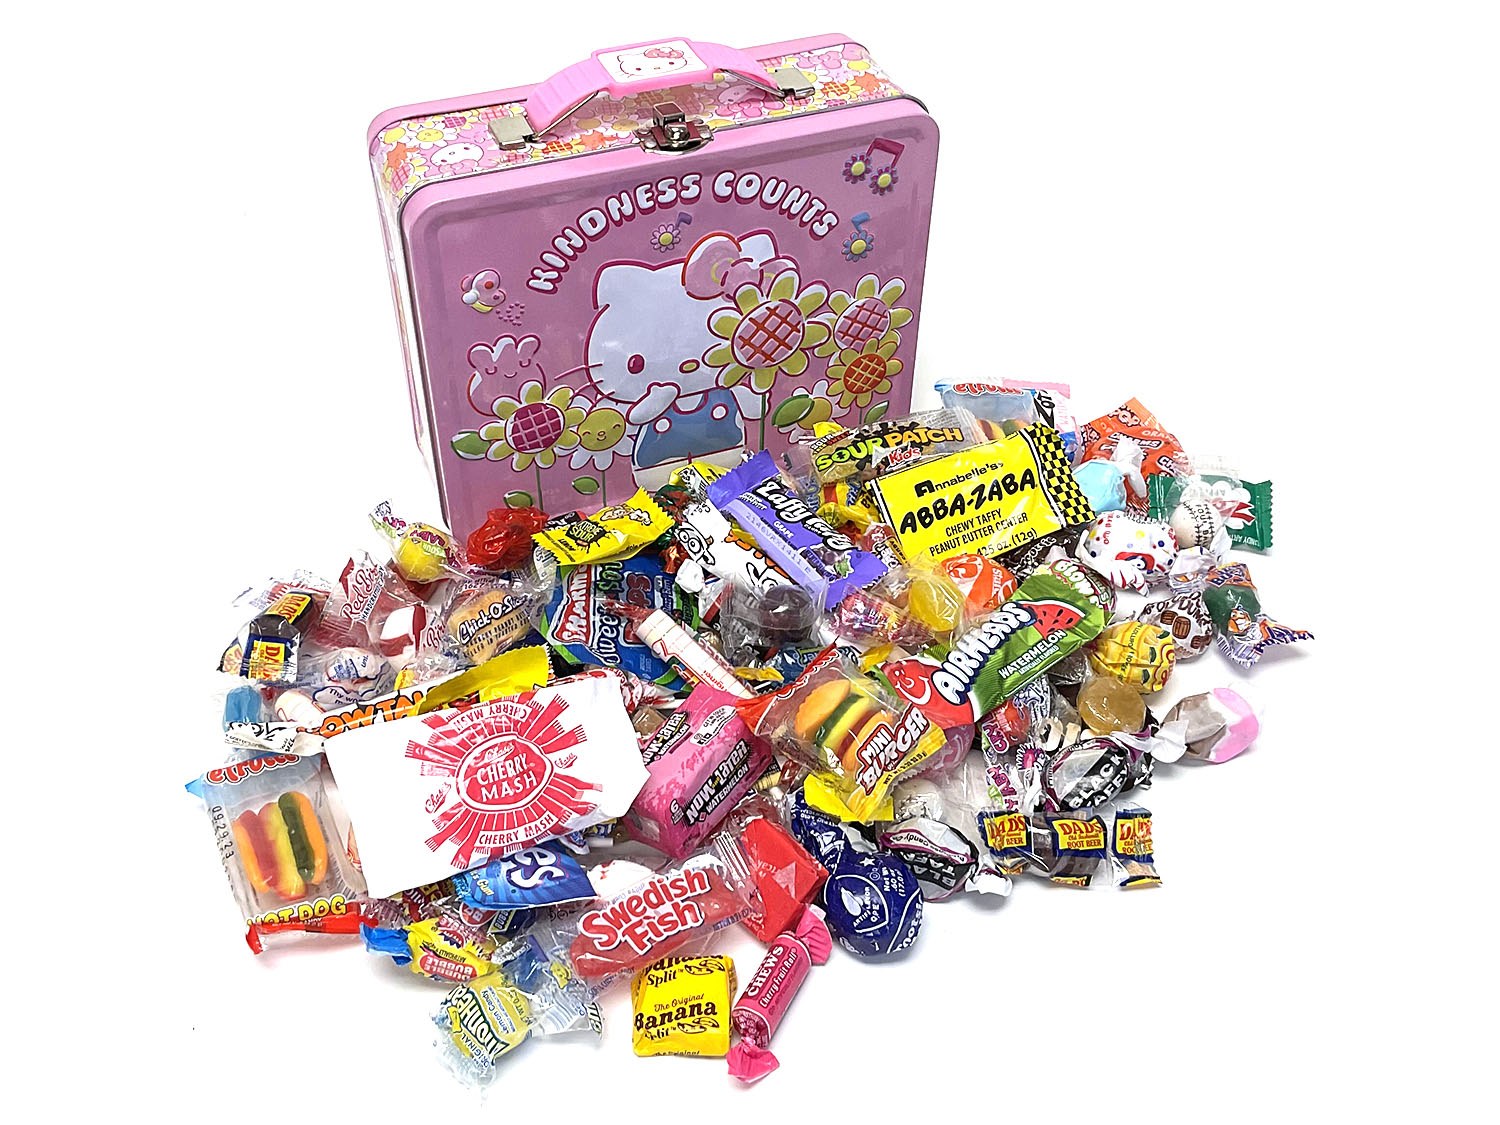 Lunch Box - Hello Kitty - Kindness Counts - penny candy assortment